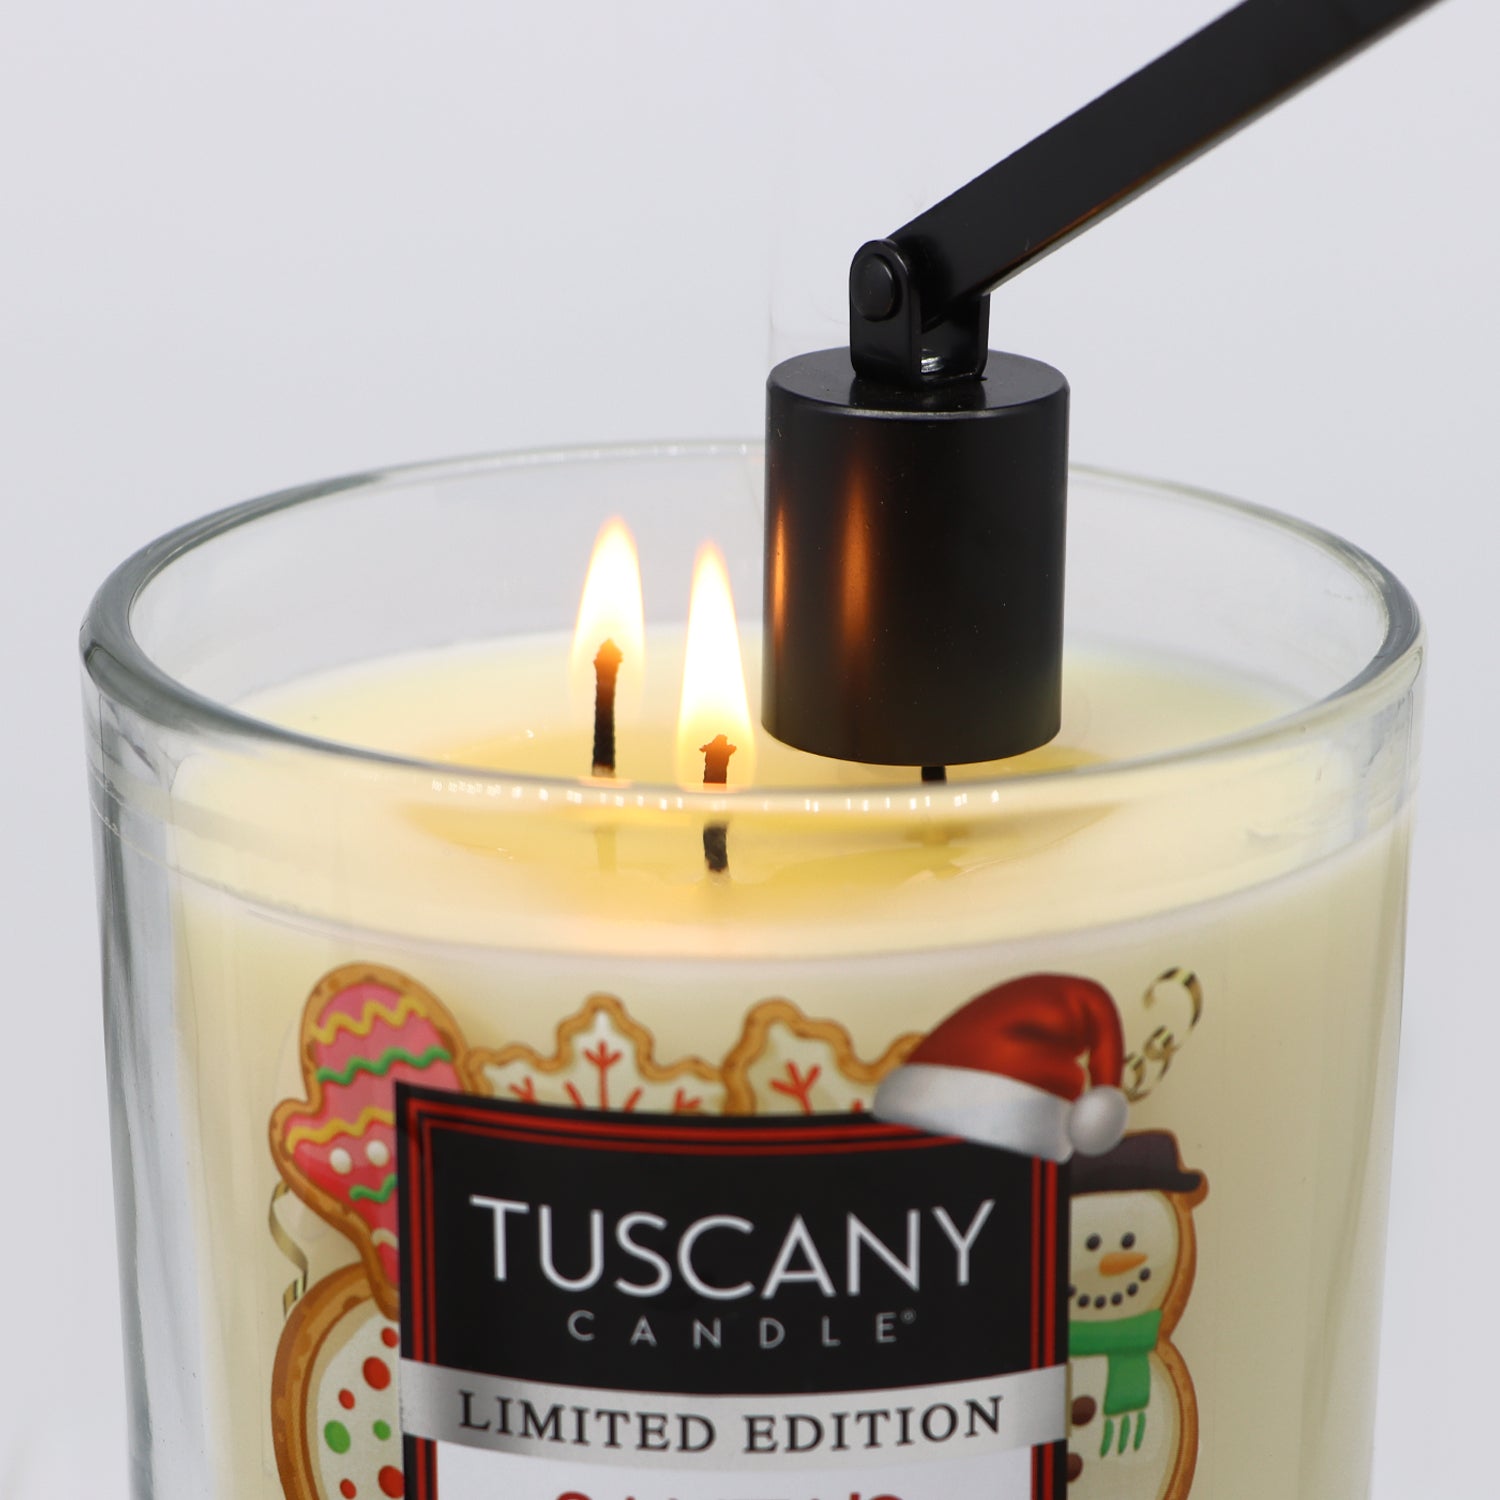 Tuscany Candle limited edition 3-Piece Candle Care Set with stainless steel elements.